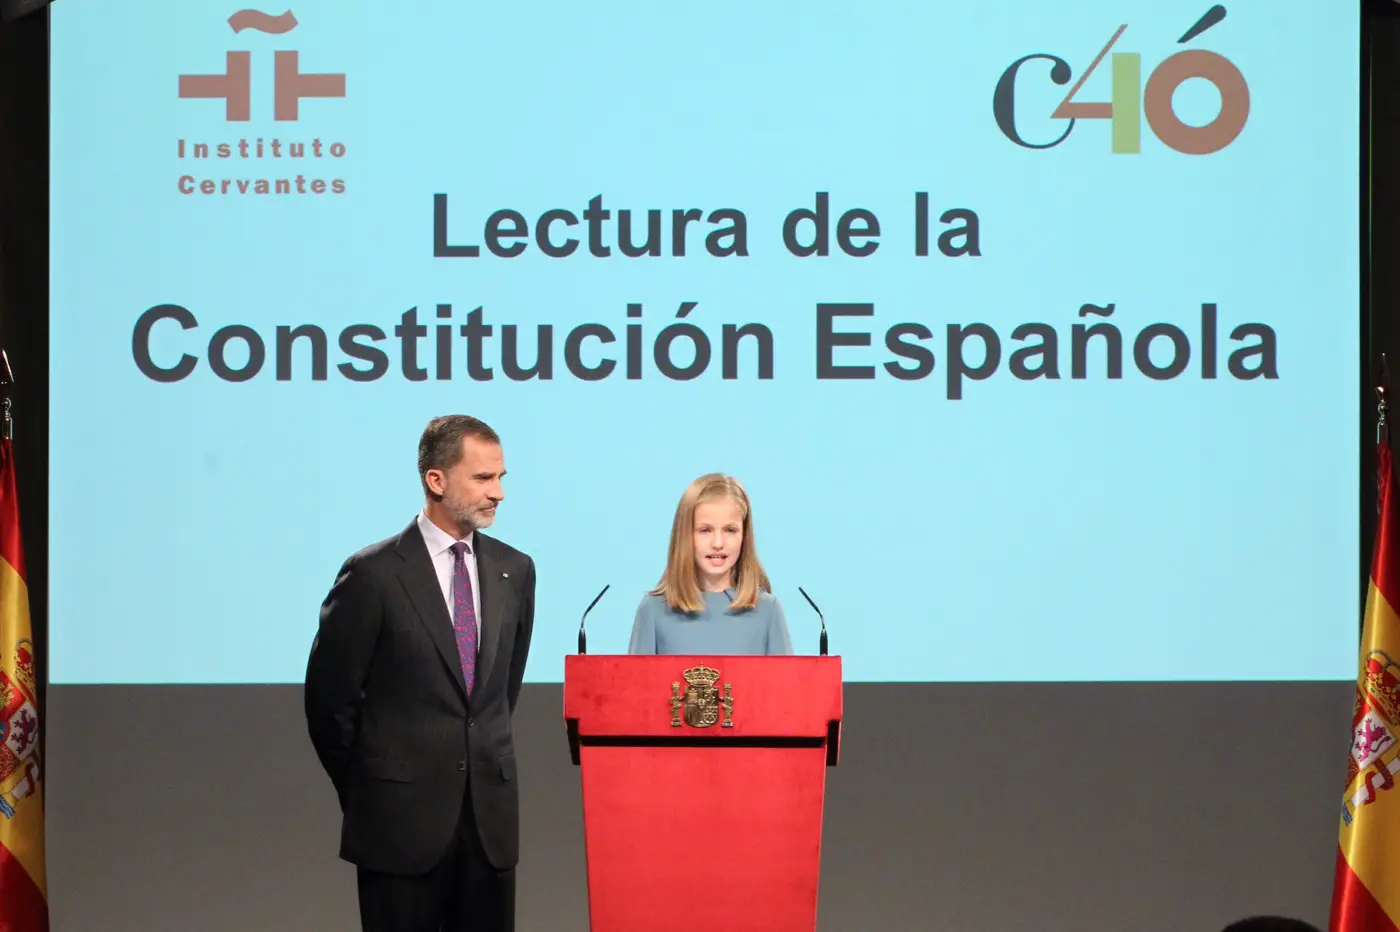 Proud Letizia and Felipe attended Leonore's first speech